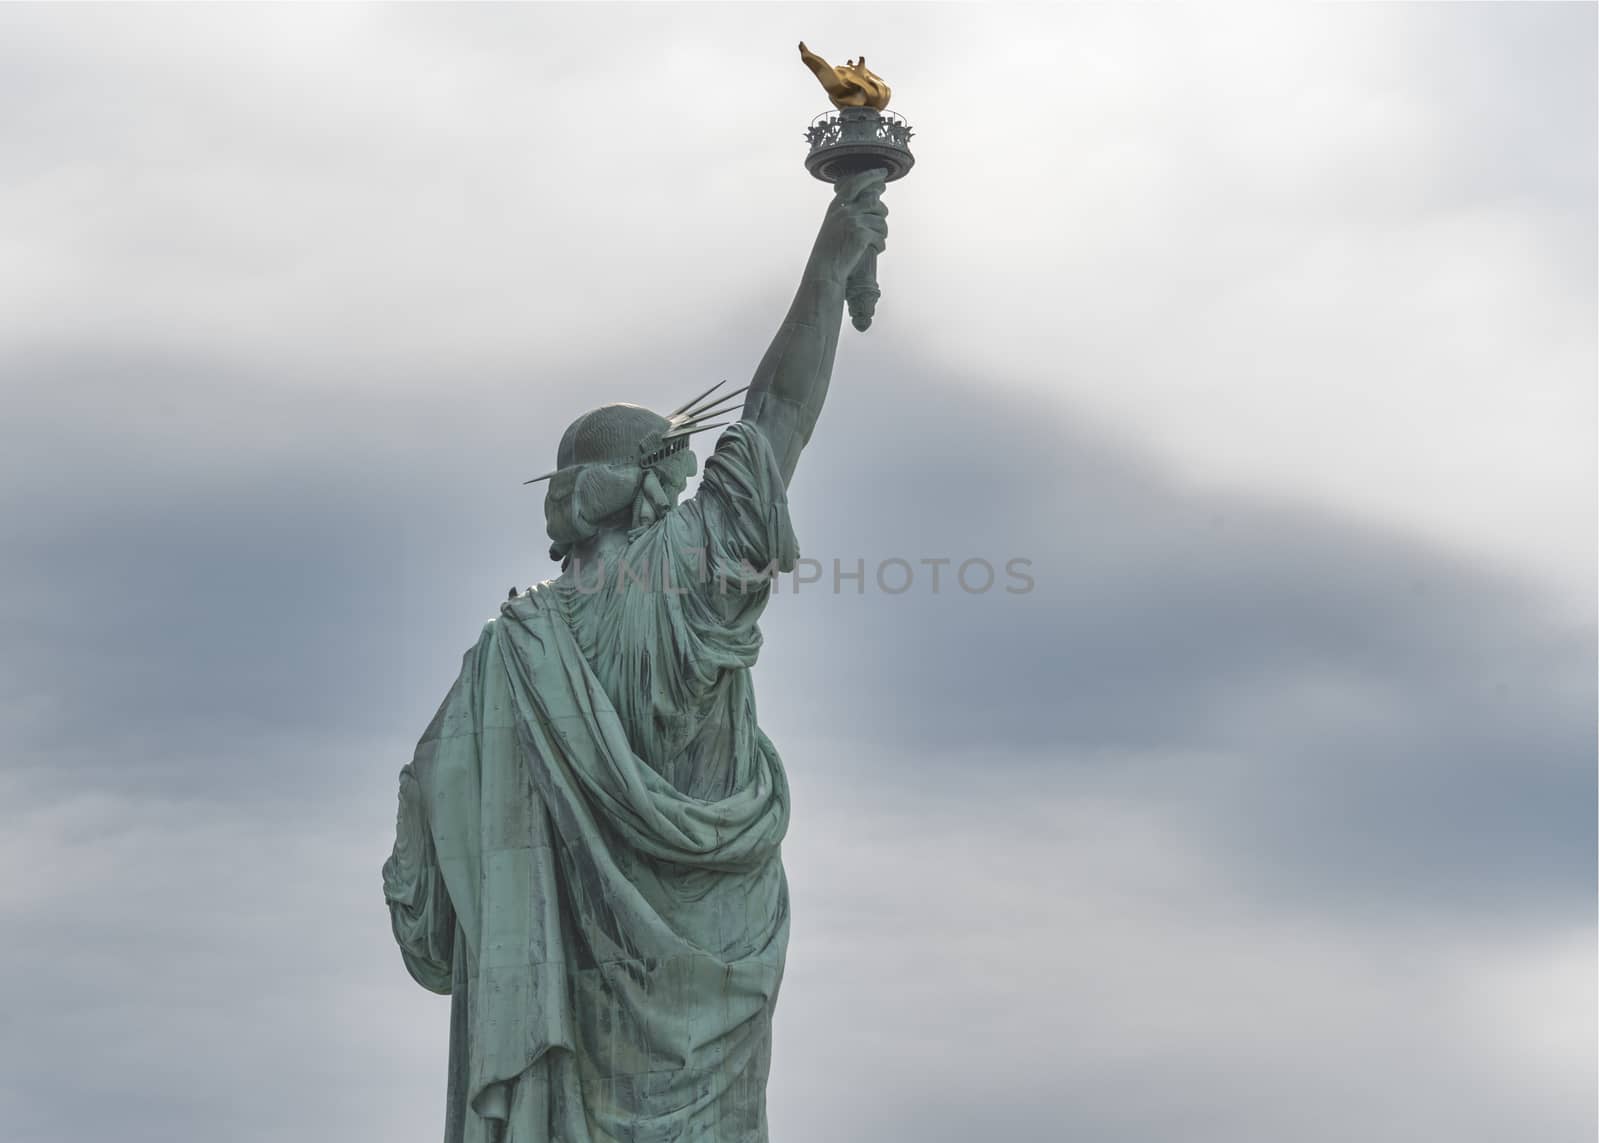 USA, New York - May 2019: Statue of Liberty, Liberty Island against an overcast sky